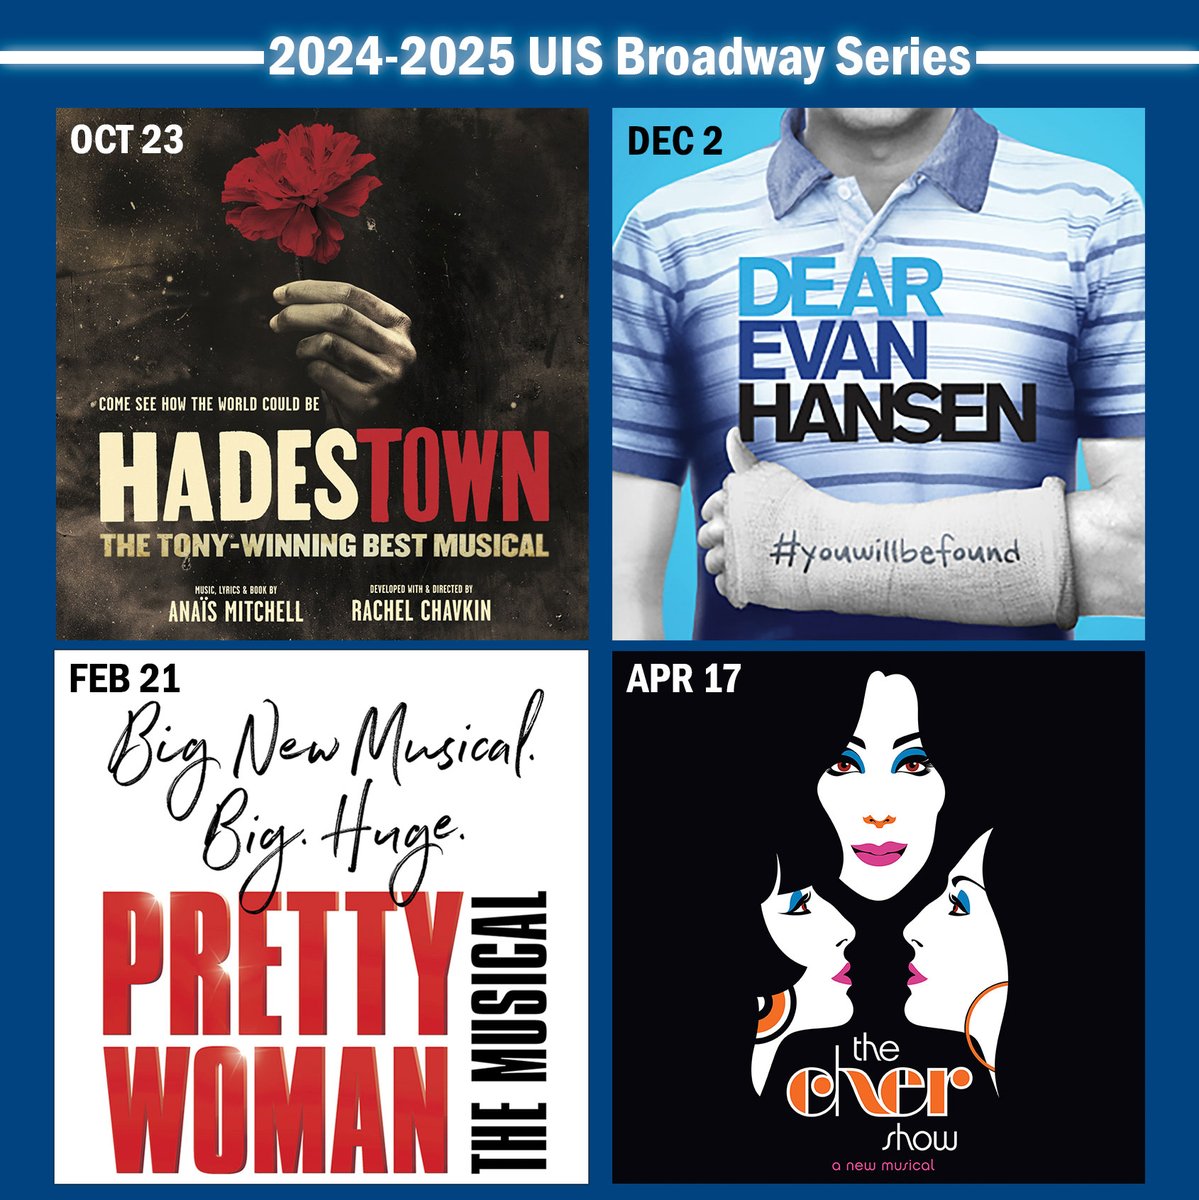 Introducing the electrifying 24.25 Broadway Series, debuting in Springfield with a stellar lineup! Featuring four sensational shows: HADESTOWN, DEAR EVAN HANSEN, PRETTY WOMAN: THE MUSICAL and THE CHER SHOW. Subscriptions on sale June 3rd ► uispac.com/subscribe/